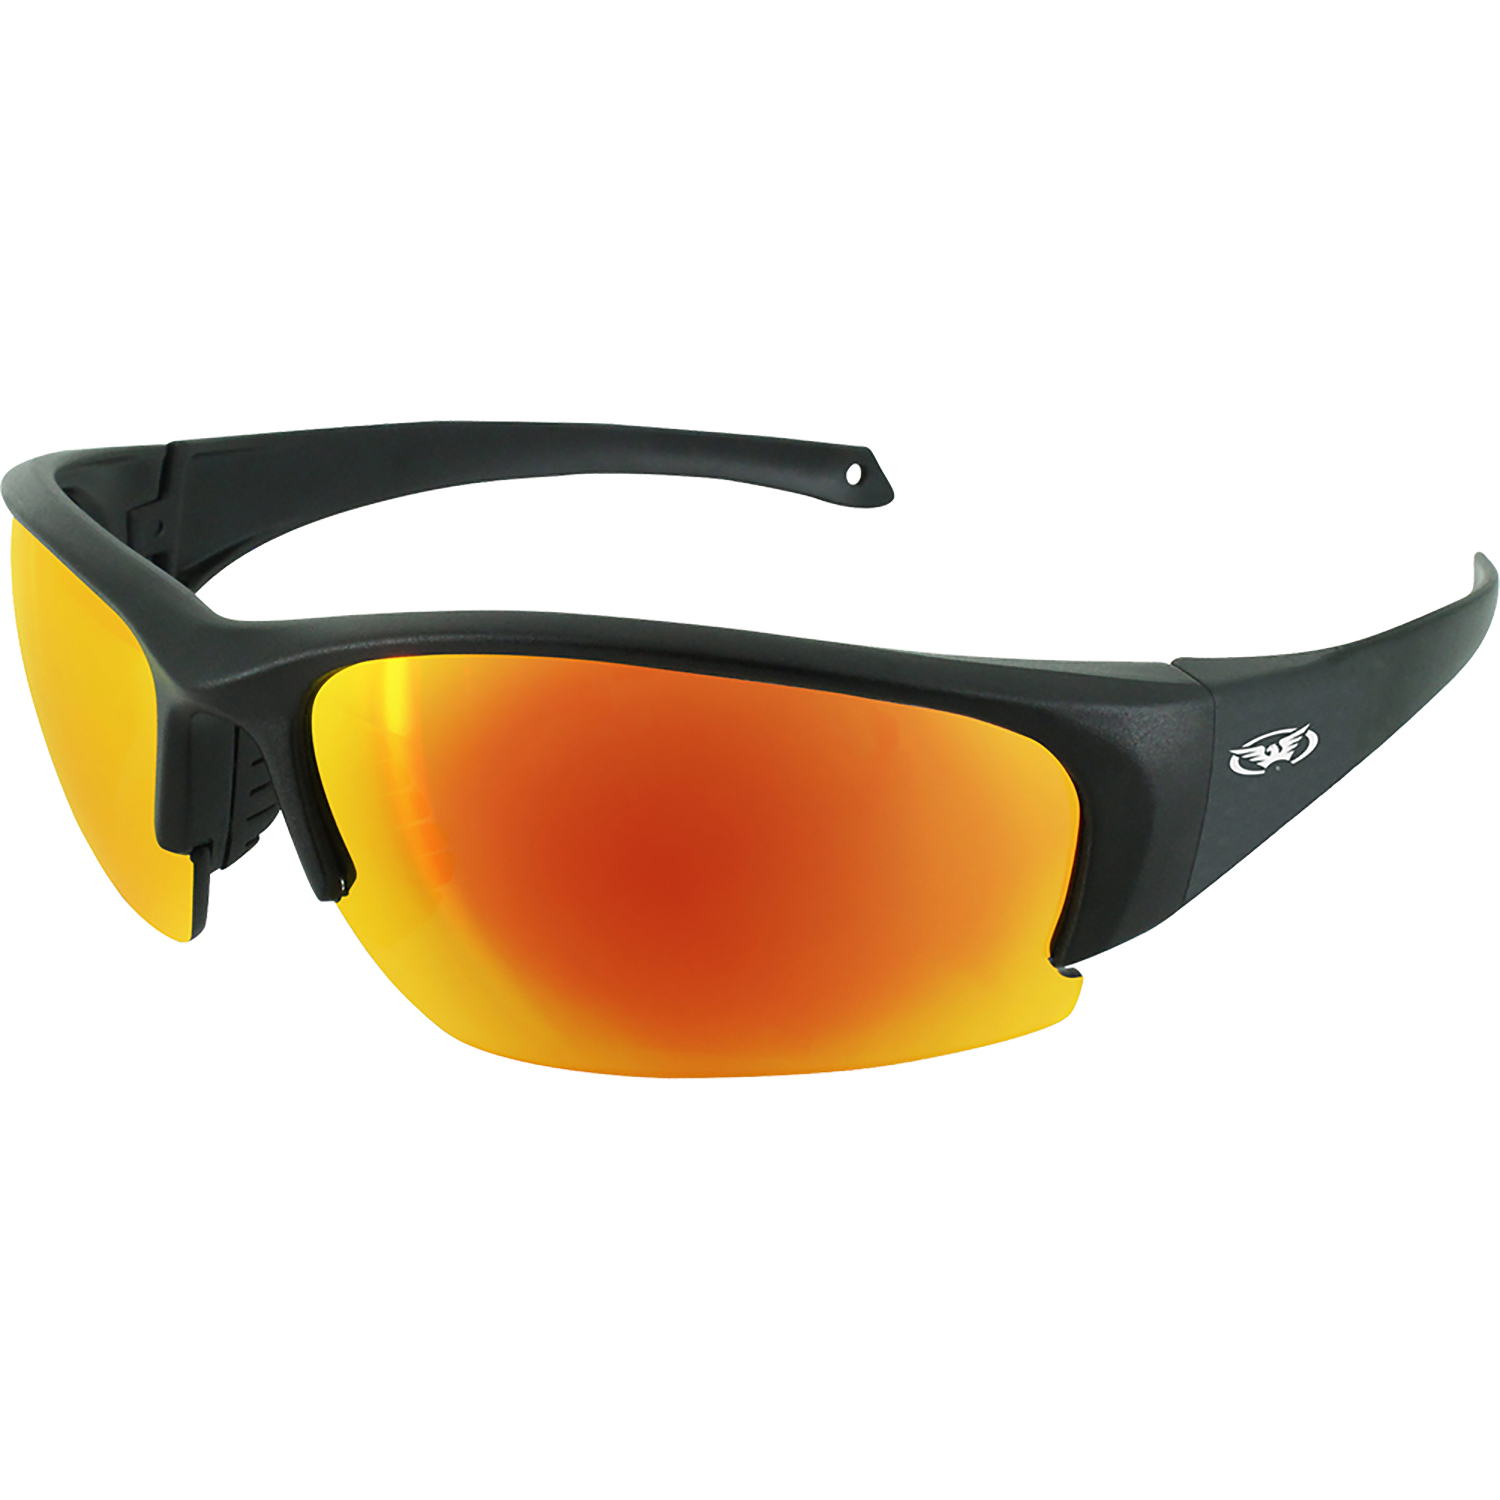 2 Pairs of Global Vision Eyewear Eyedol Motorcycle Safety Sunglasses Black Frames Yellow + G Tech Red Mirror Lenses - image 3 of 3